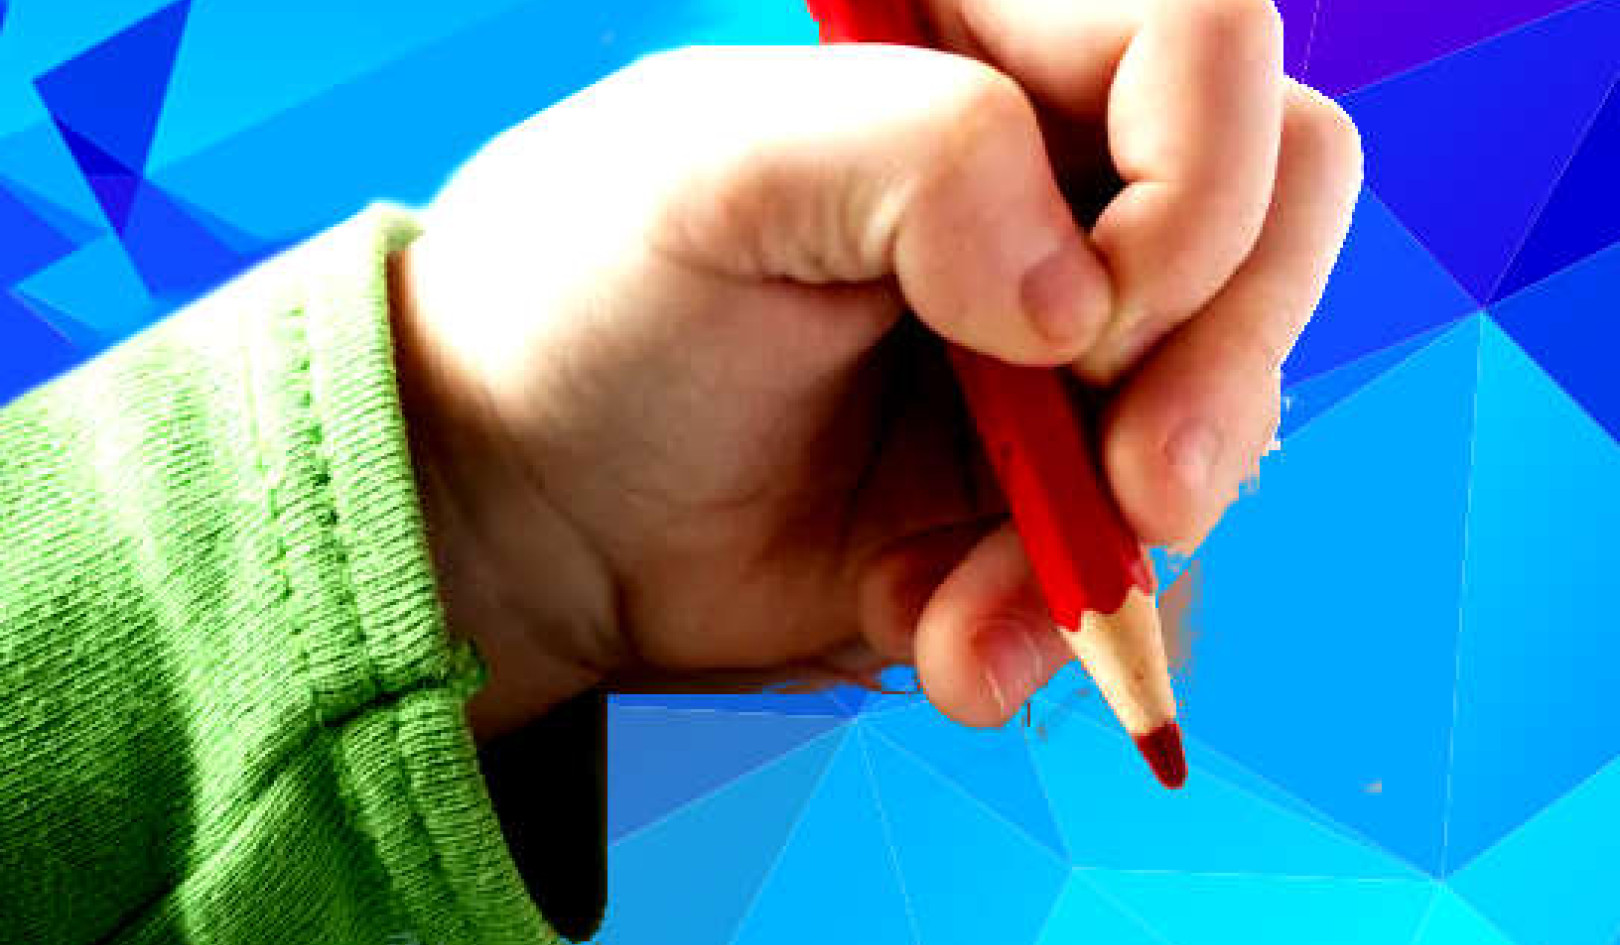 Why Are Some Kids Left-handed and Others Are Right-handed?